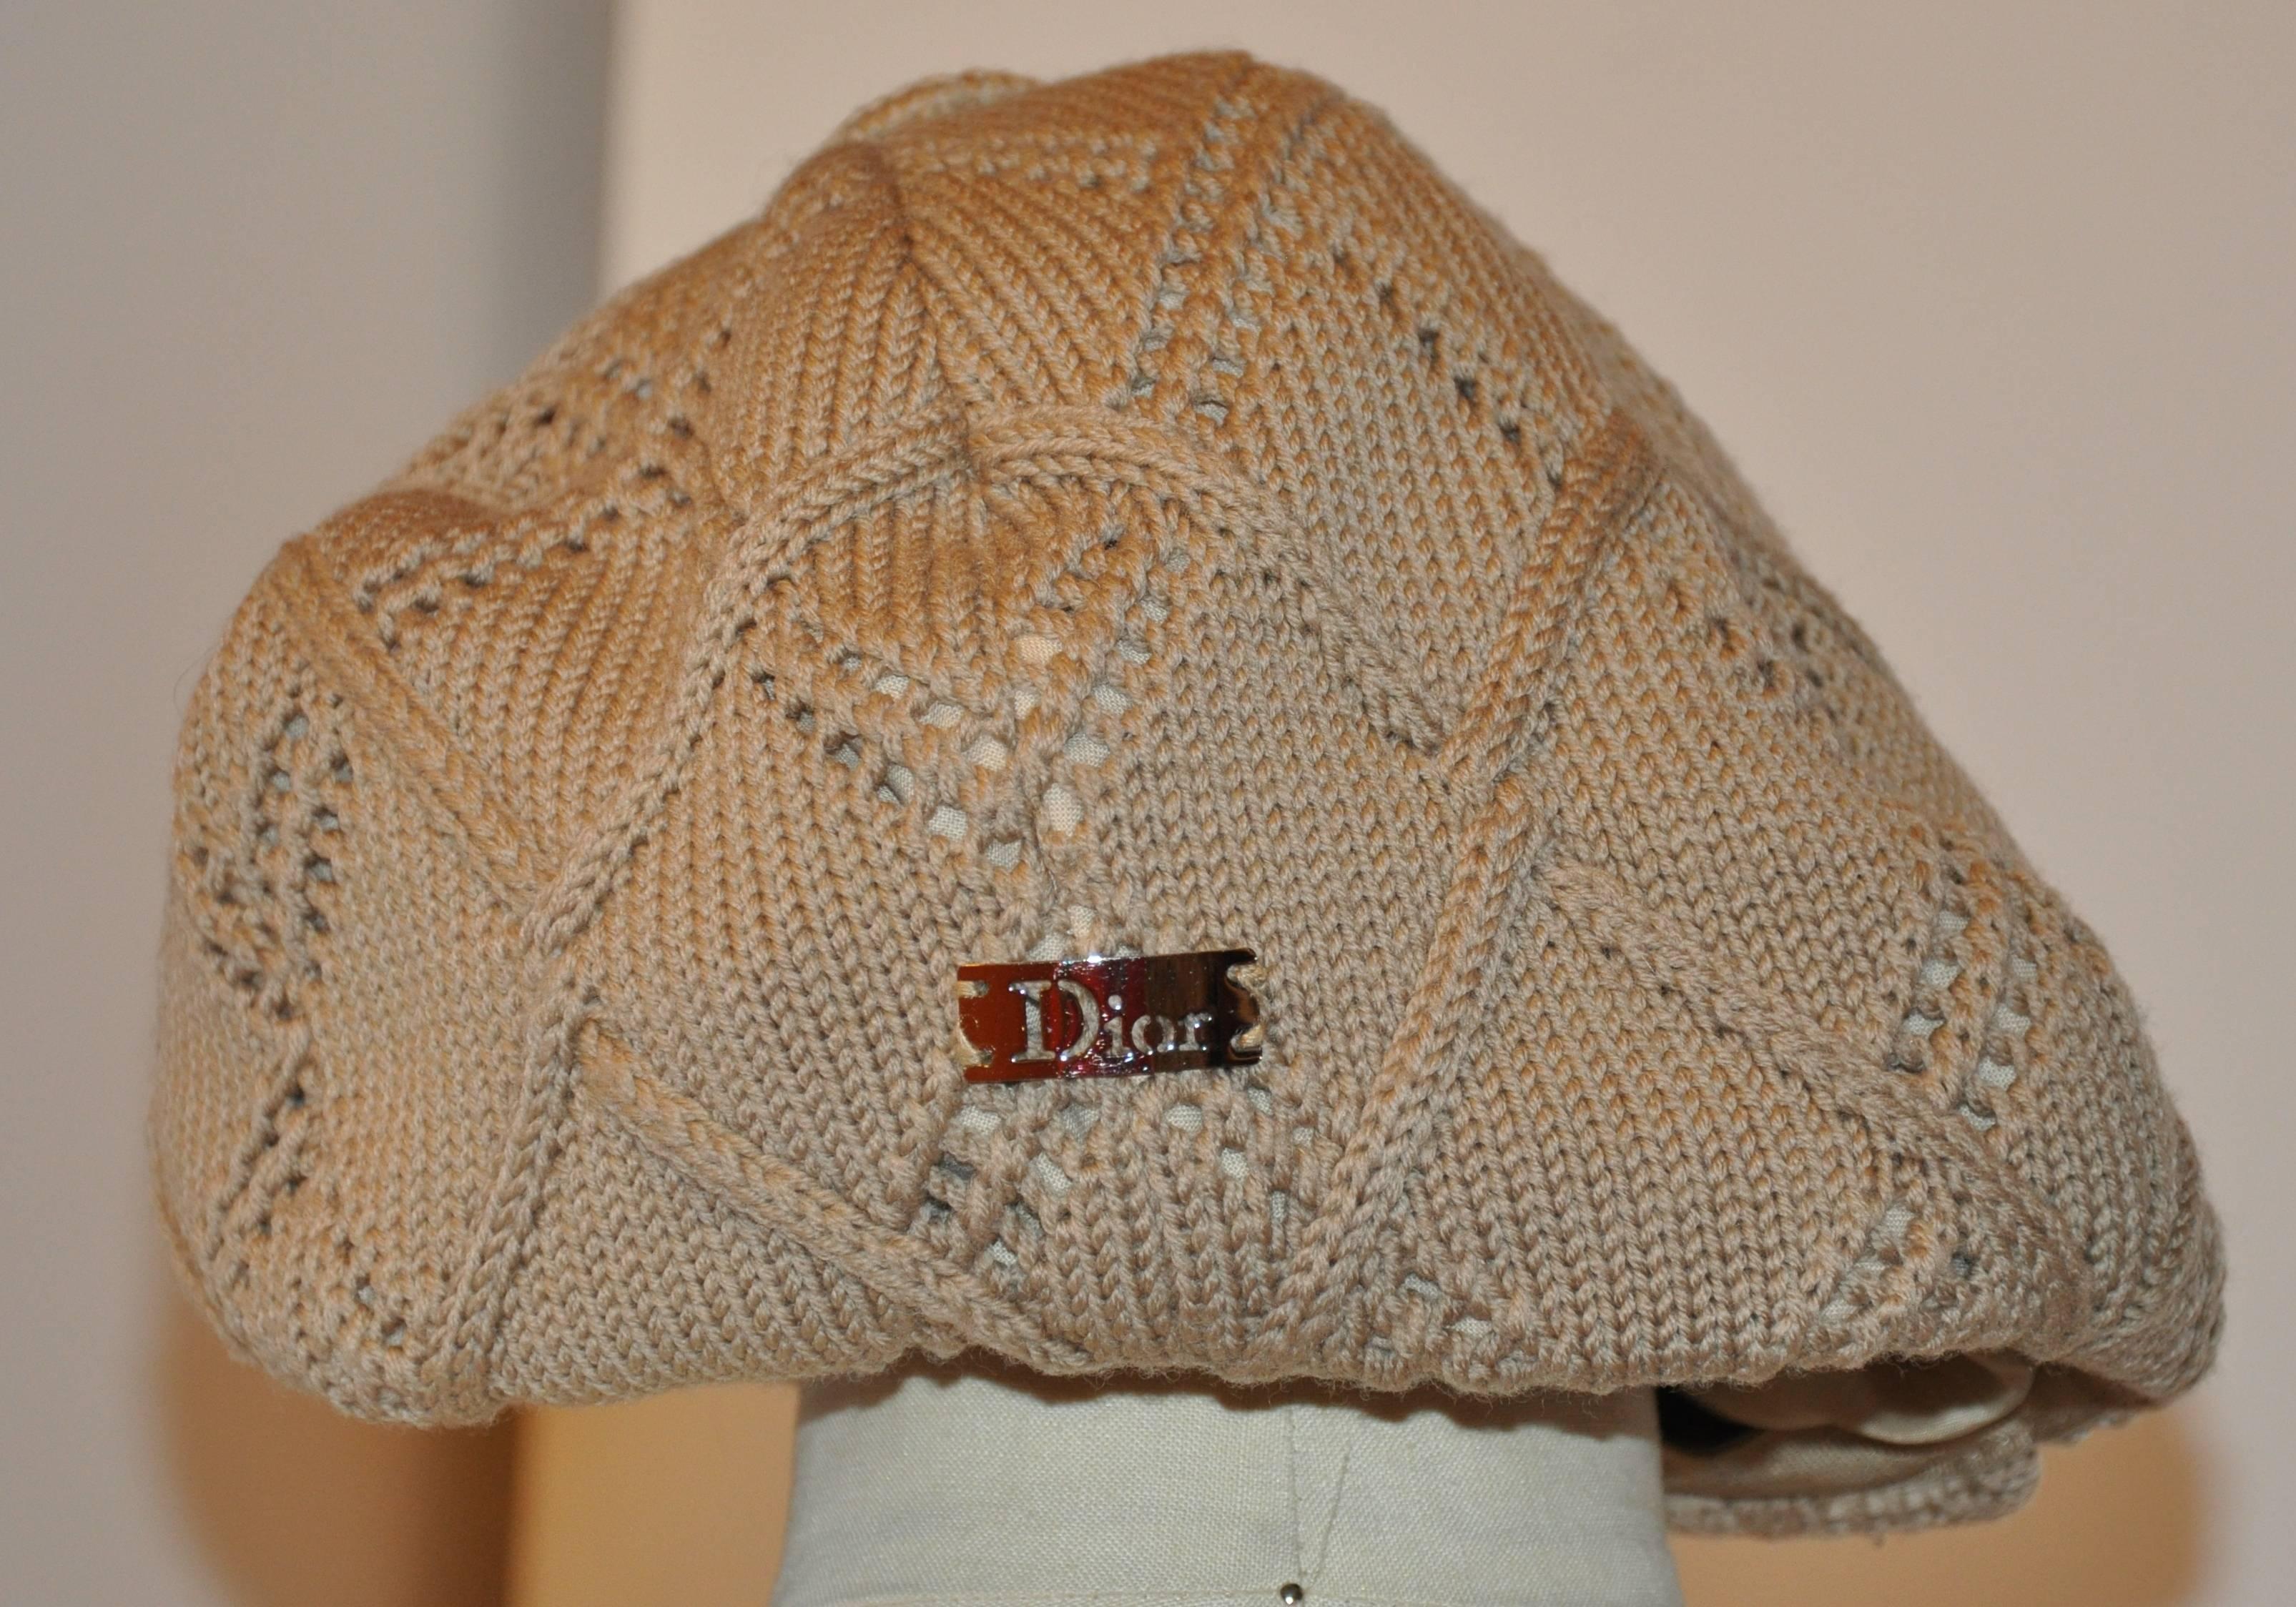 Christian Dior "Boutique" fully-lined woven beige "Newsboy" cap measures 23" in circumference on the interior. Fully-lined and accented with a 1" ribbon cord around the interior edge, the front extends 2 1/2", and